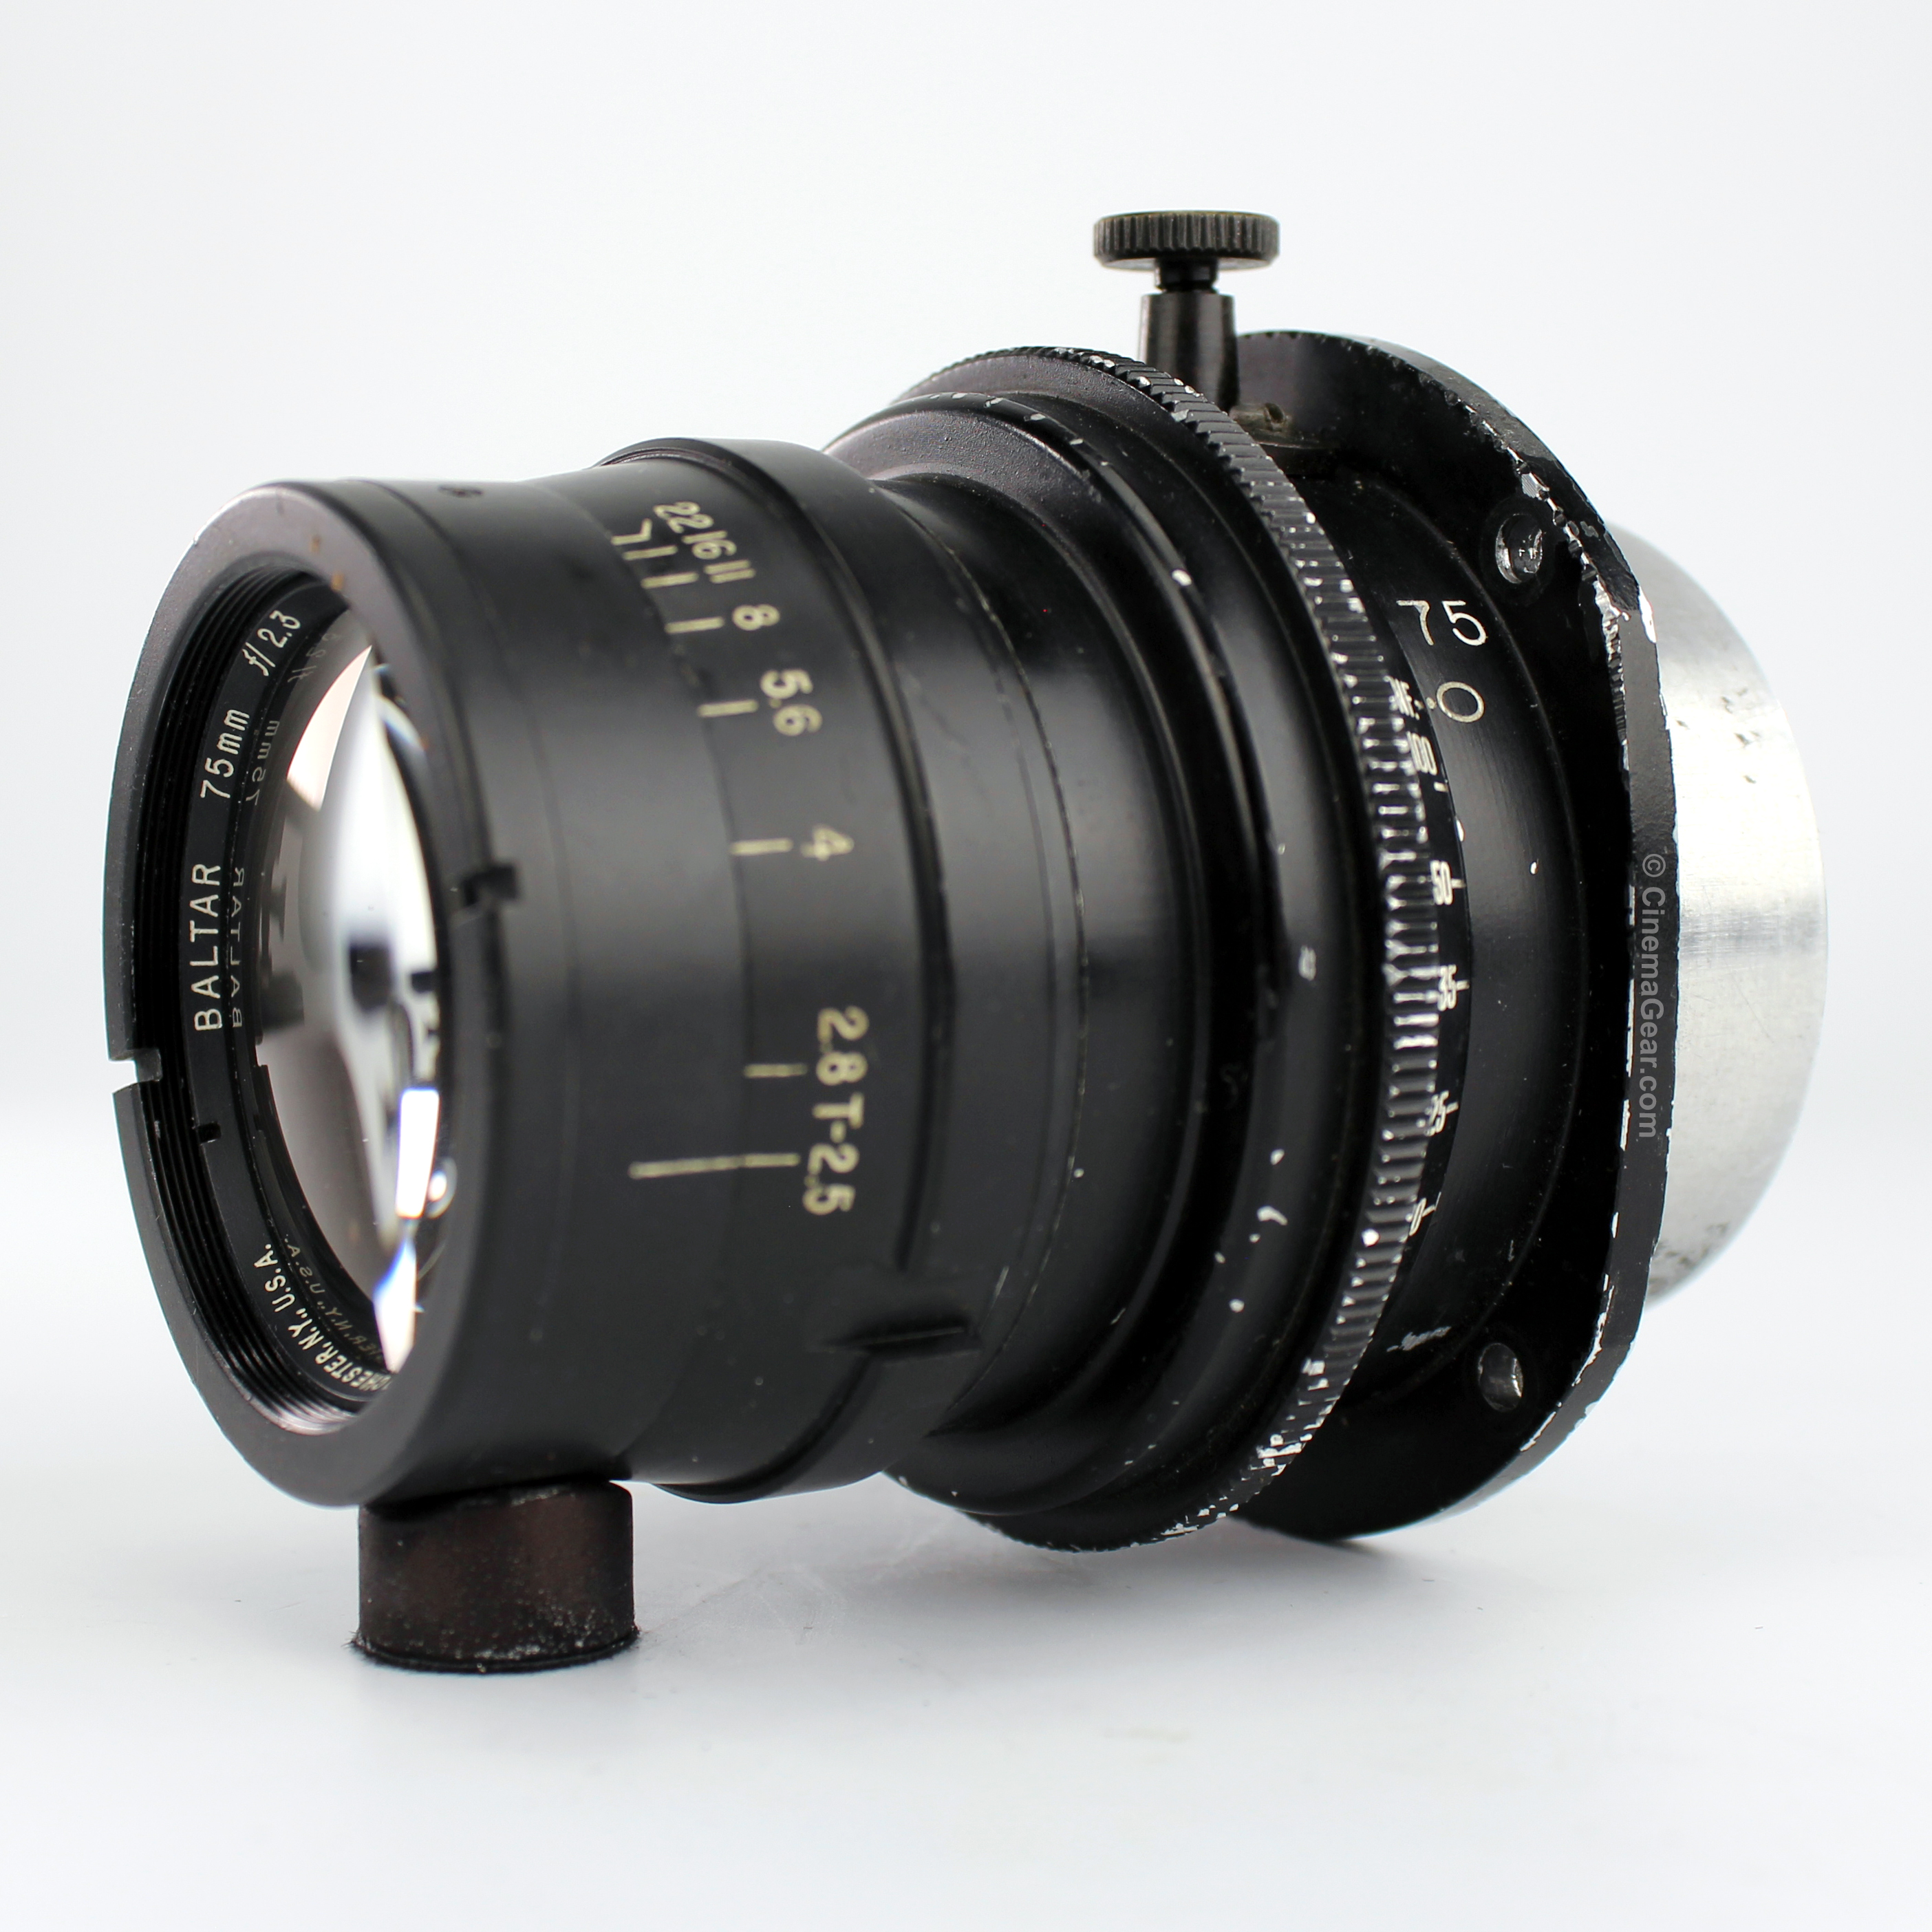 Bausch and Lomb Baltar 75mm f2.3 lens in Mitchell Standard  mount.